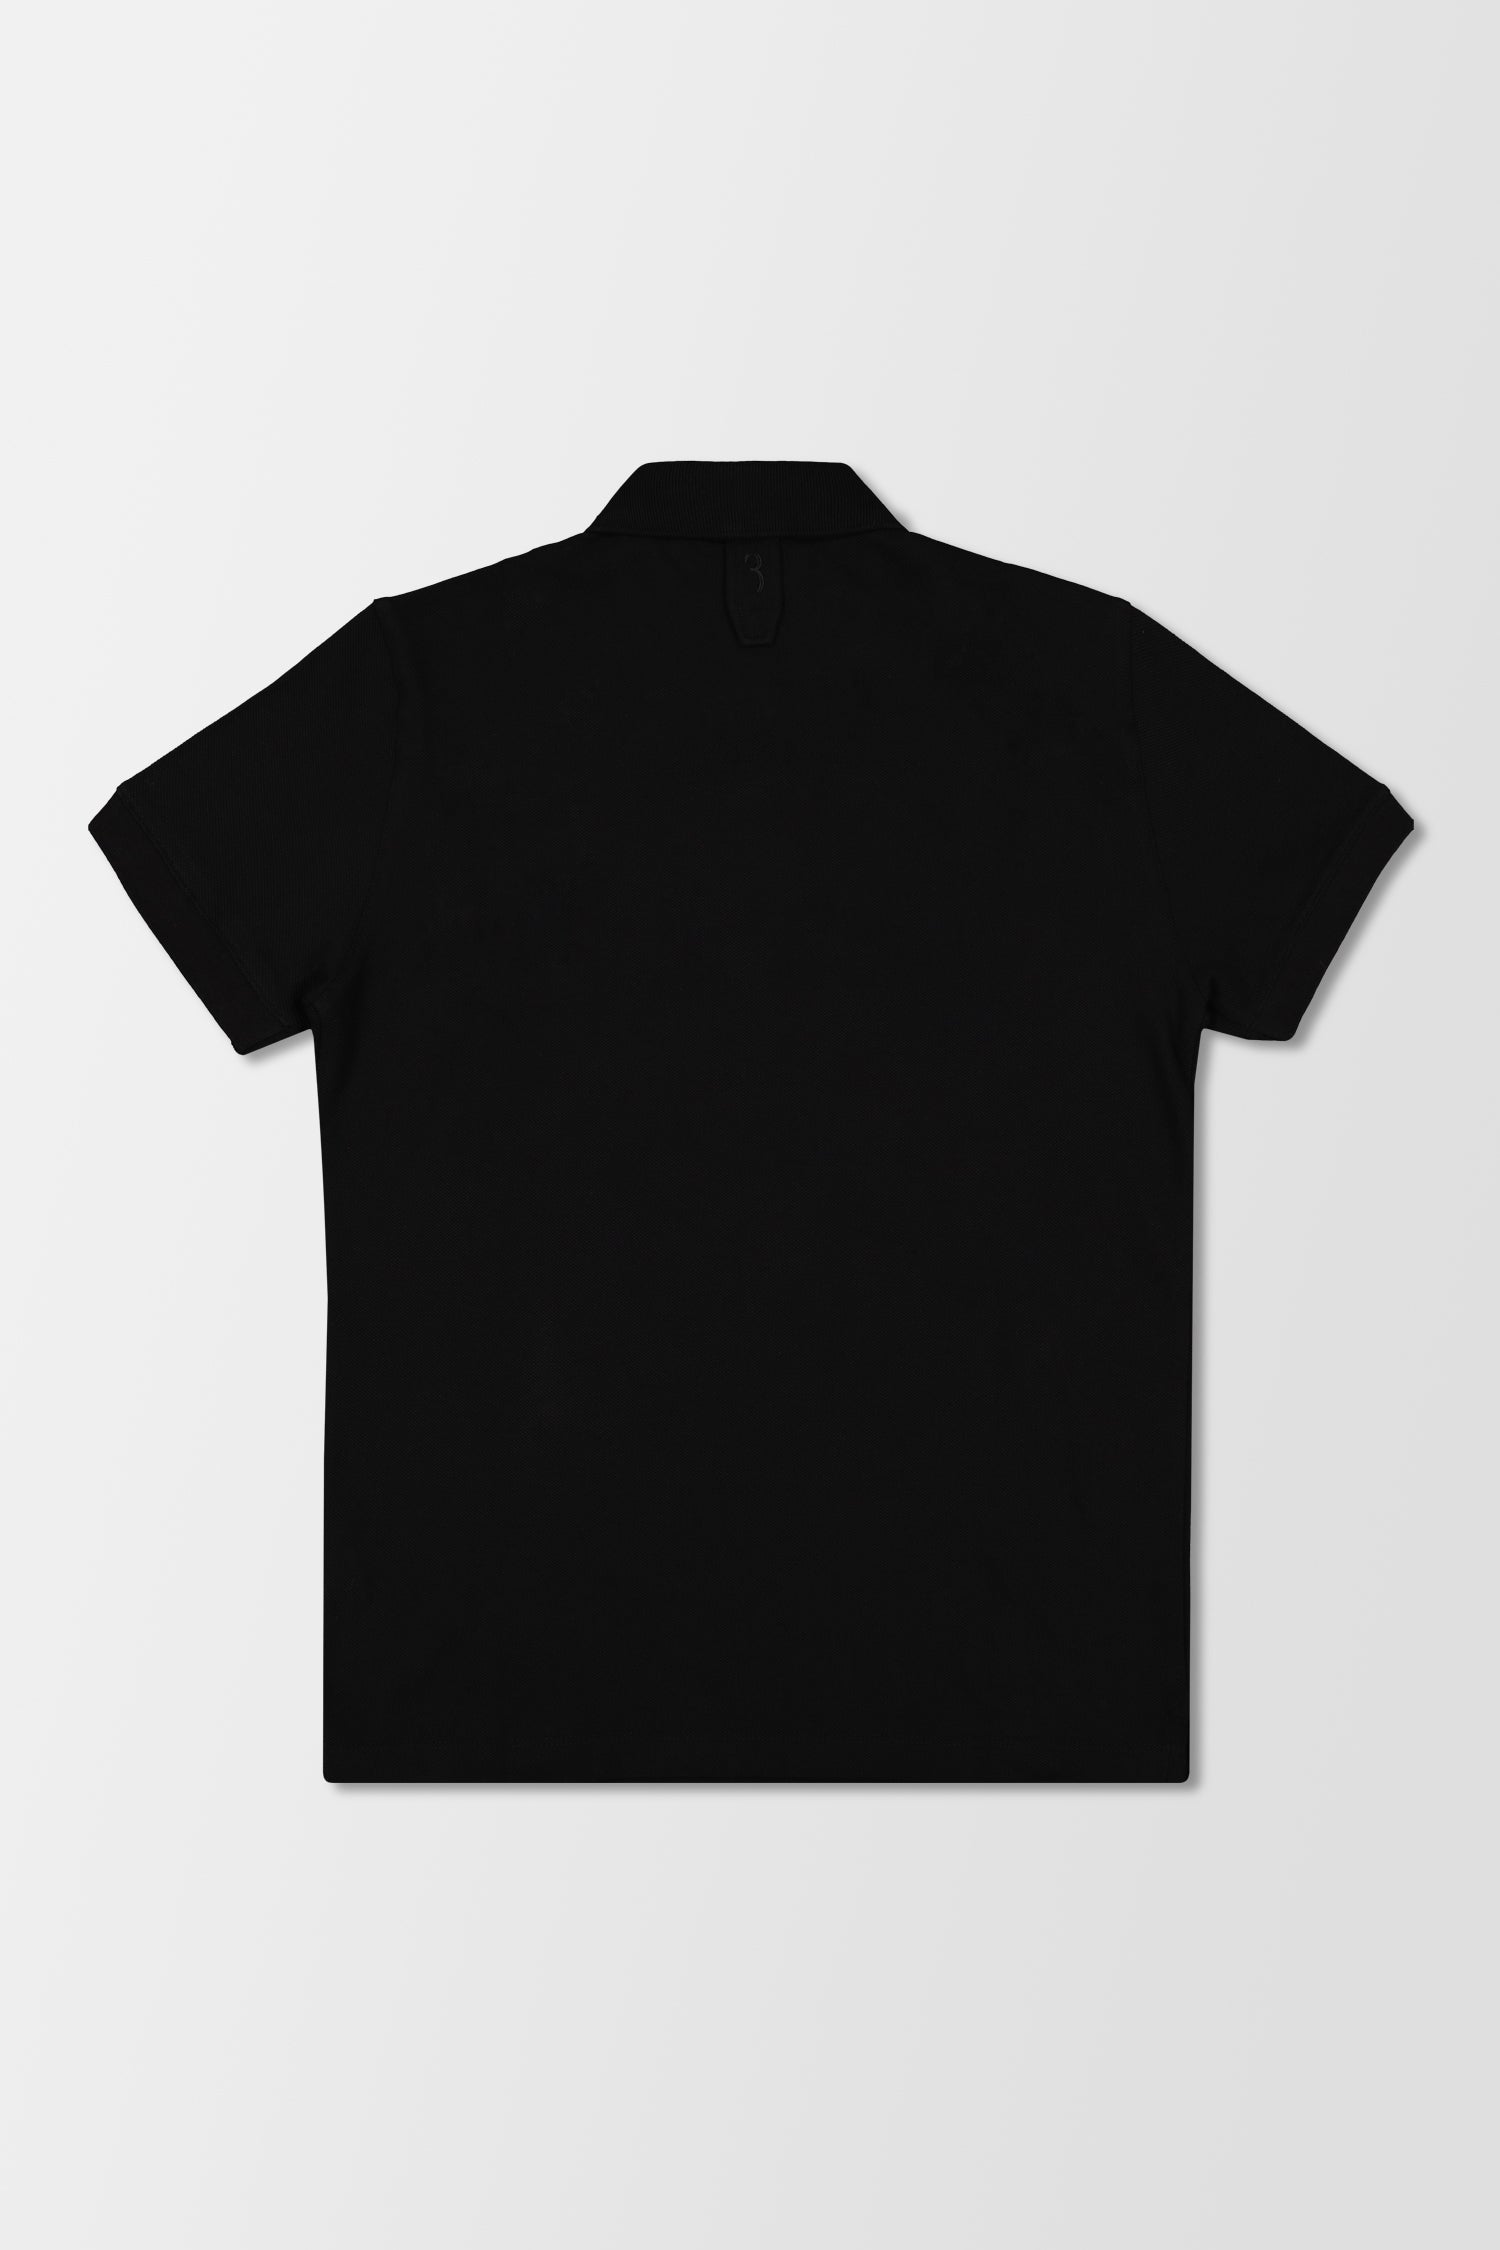 Billionaire Black SS Members Only Polo